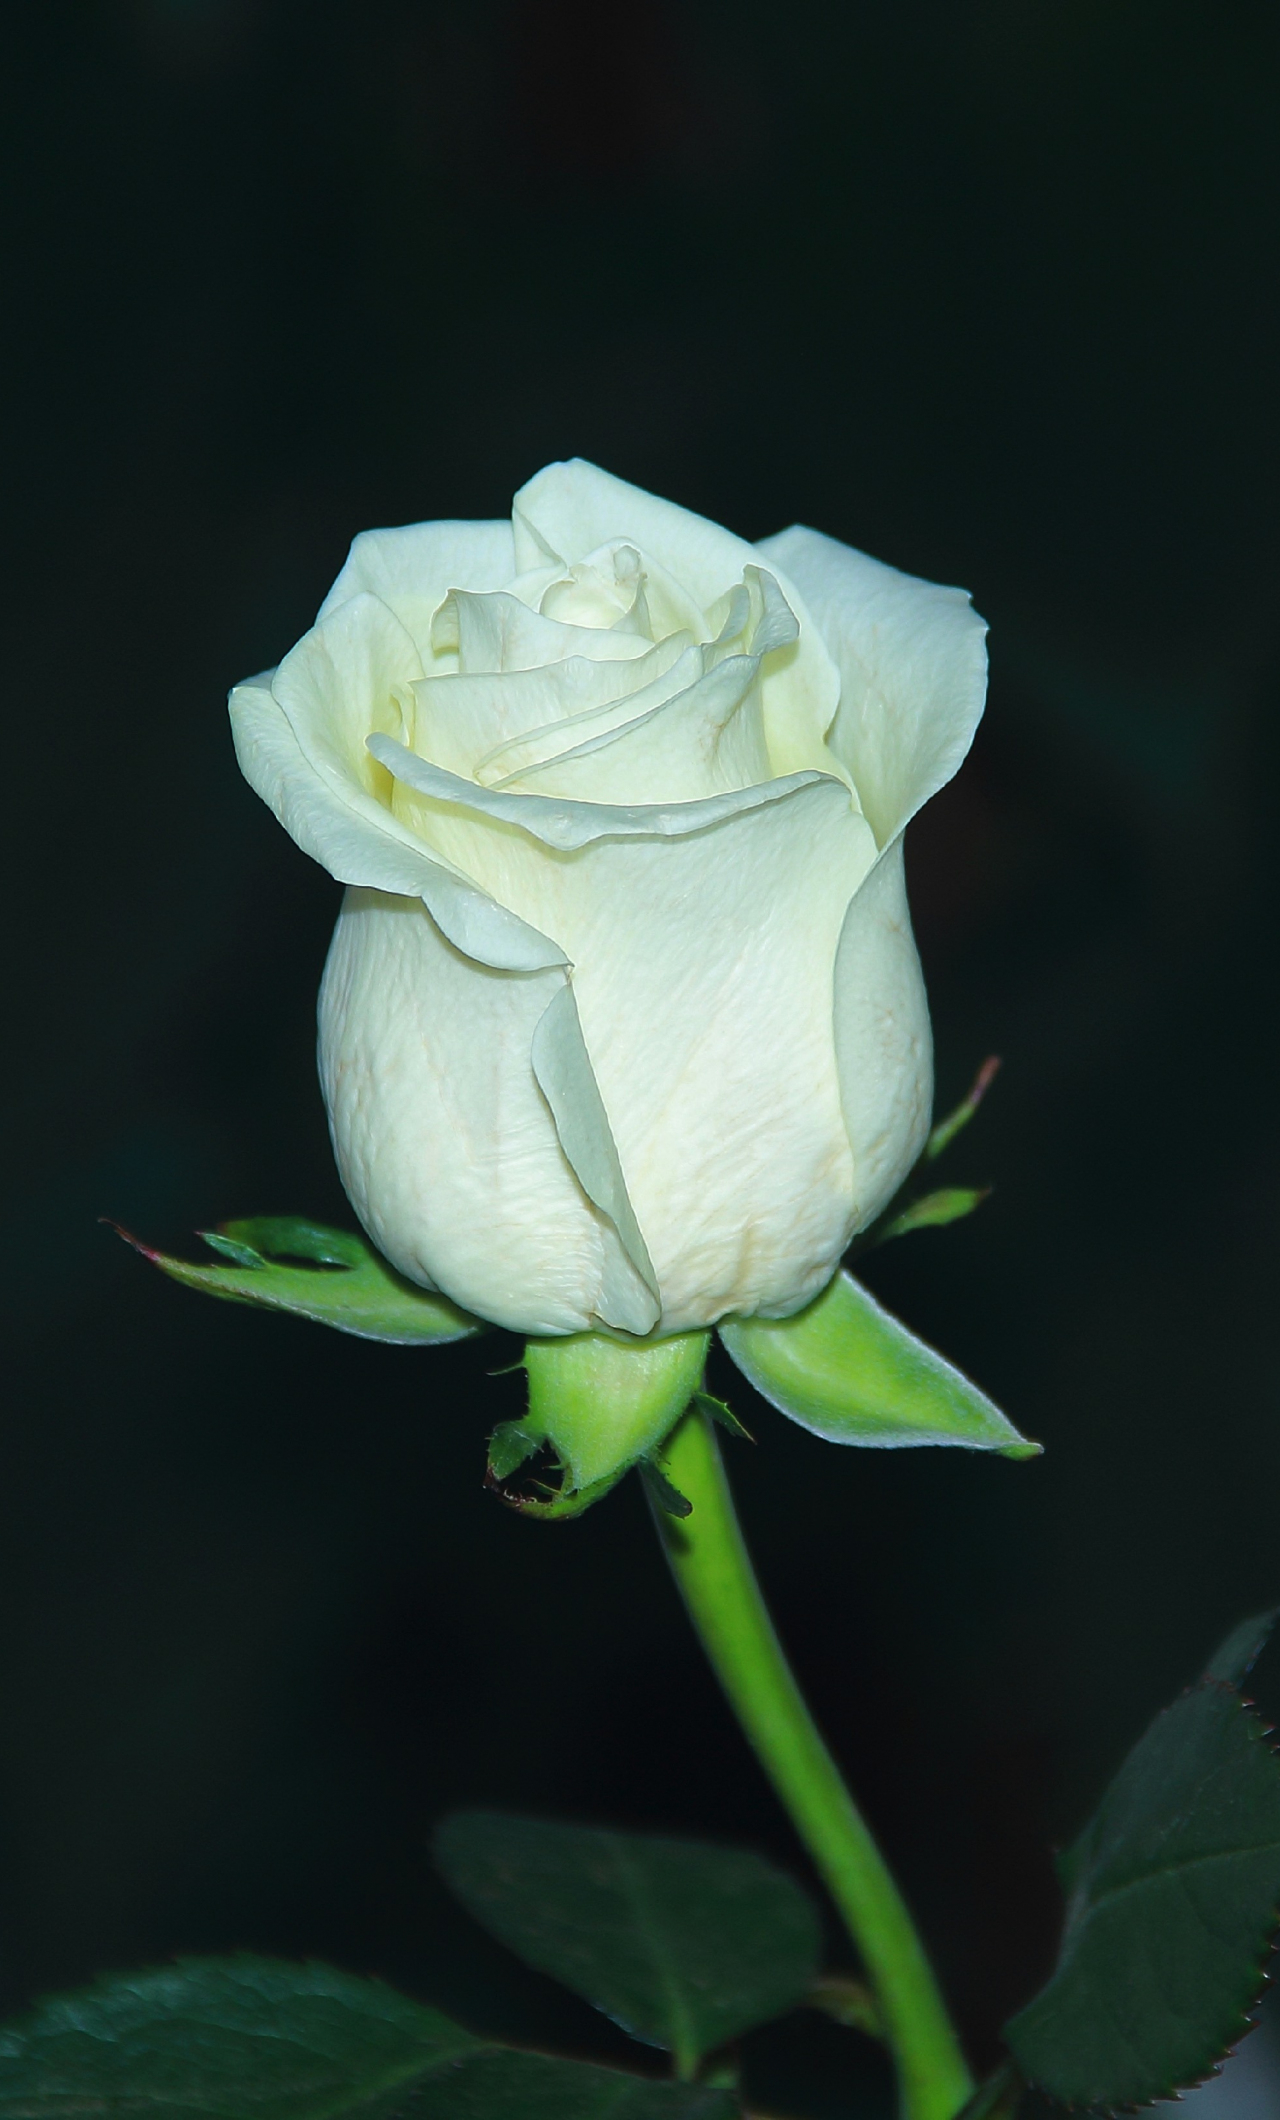 1280x2120 Download white rose, bud, flower, portrait wallpaper, iphone 6 plus, hd image, background, 2230